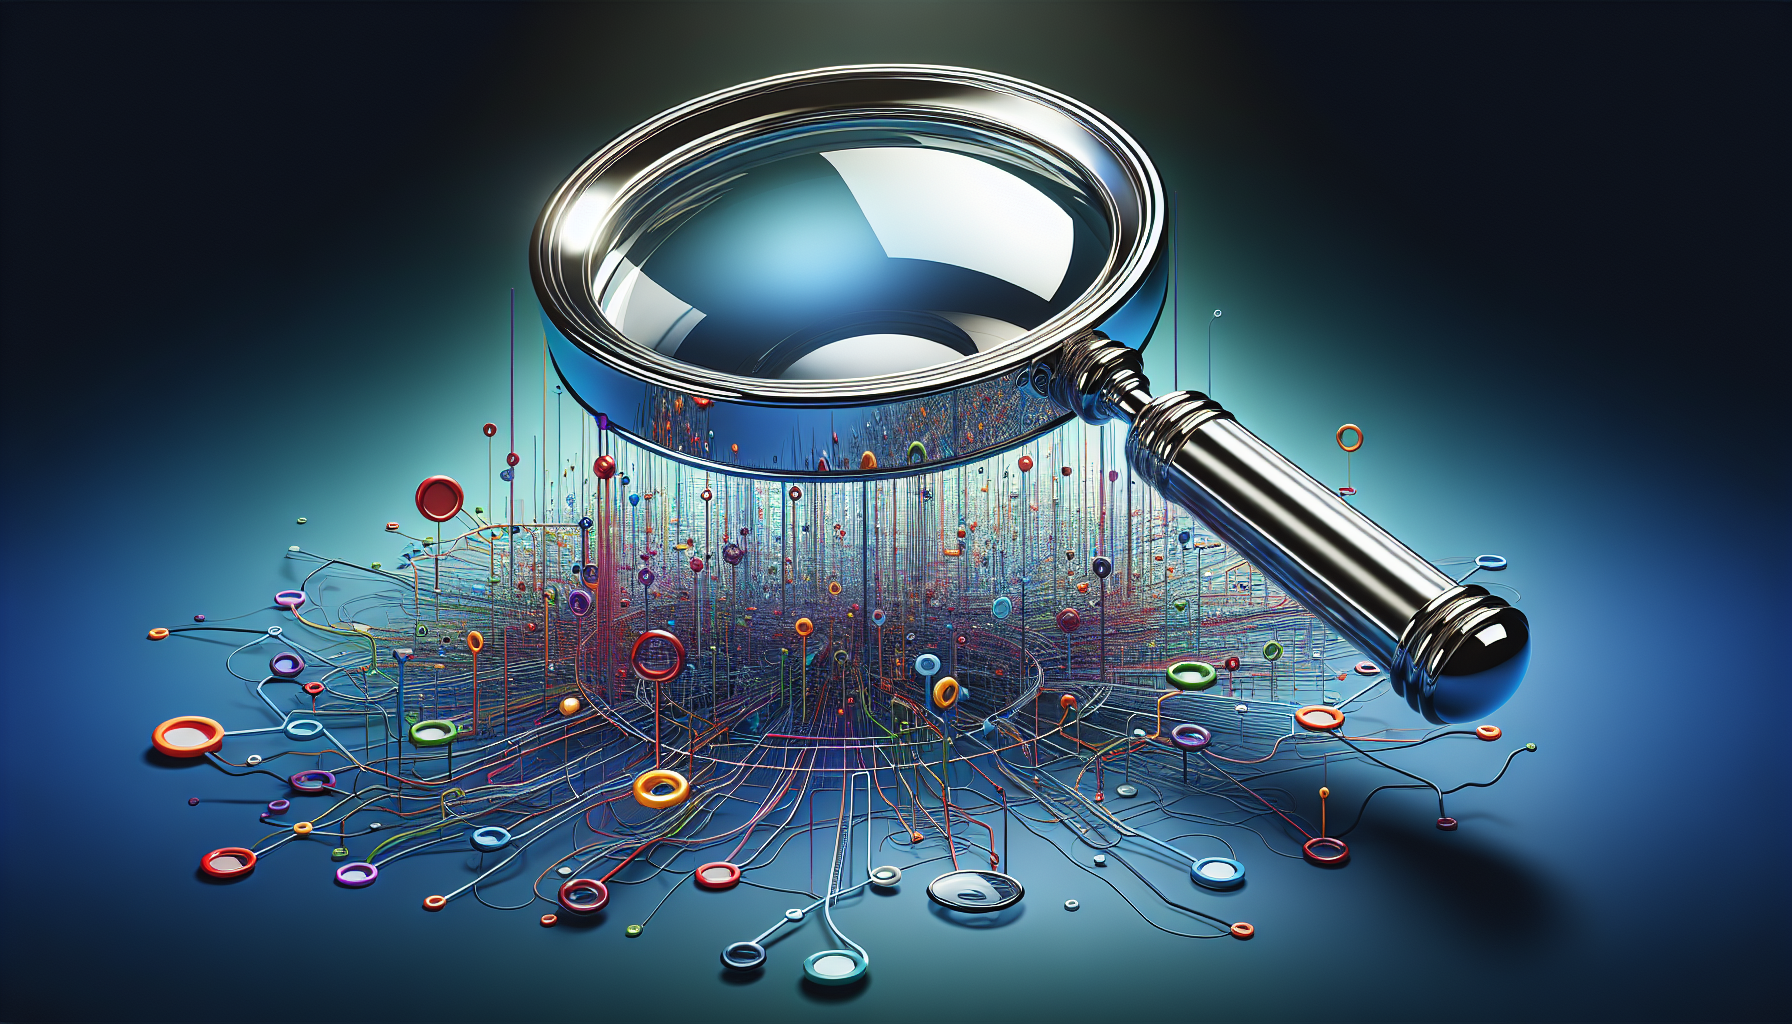 Illustration of a magnifying glass over a web page, symbolizing search engine optimization